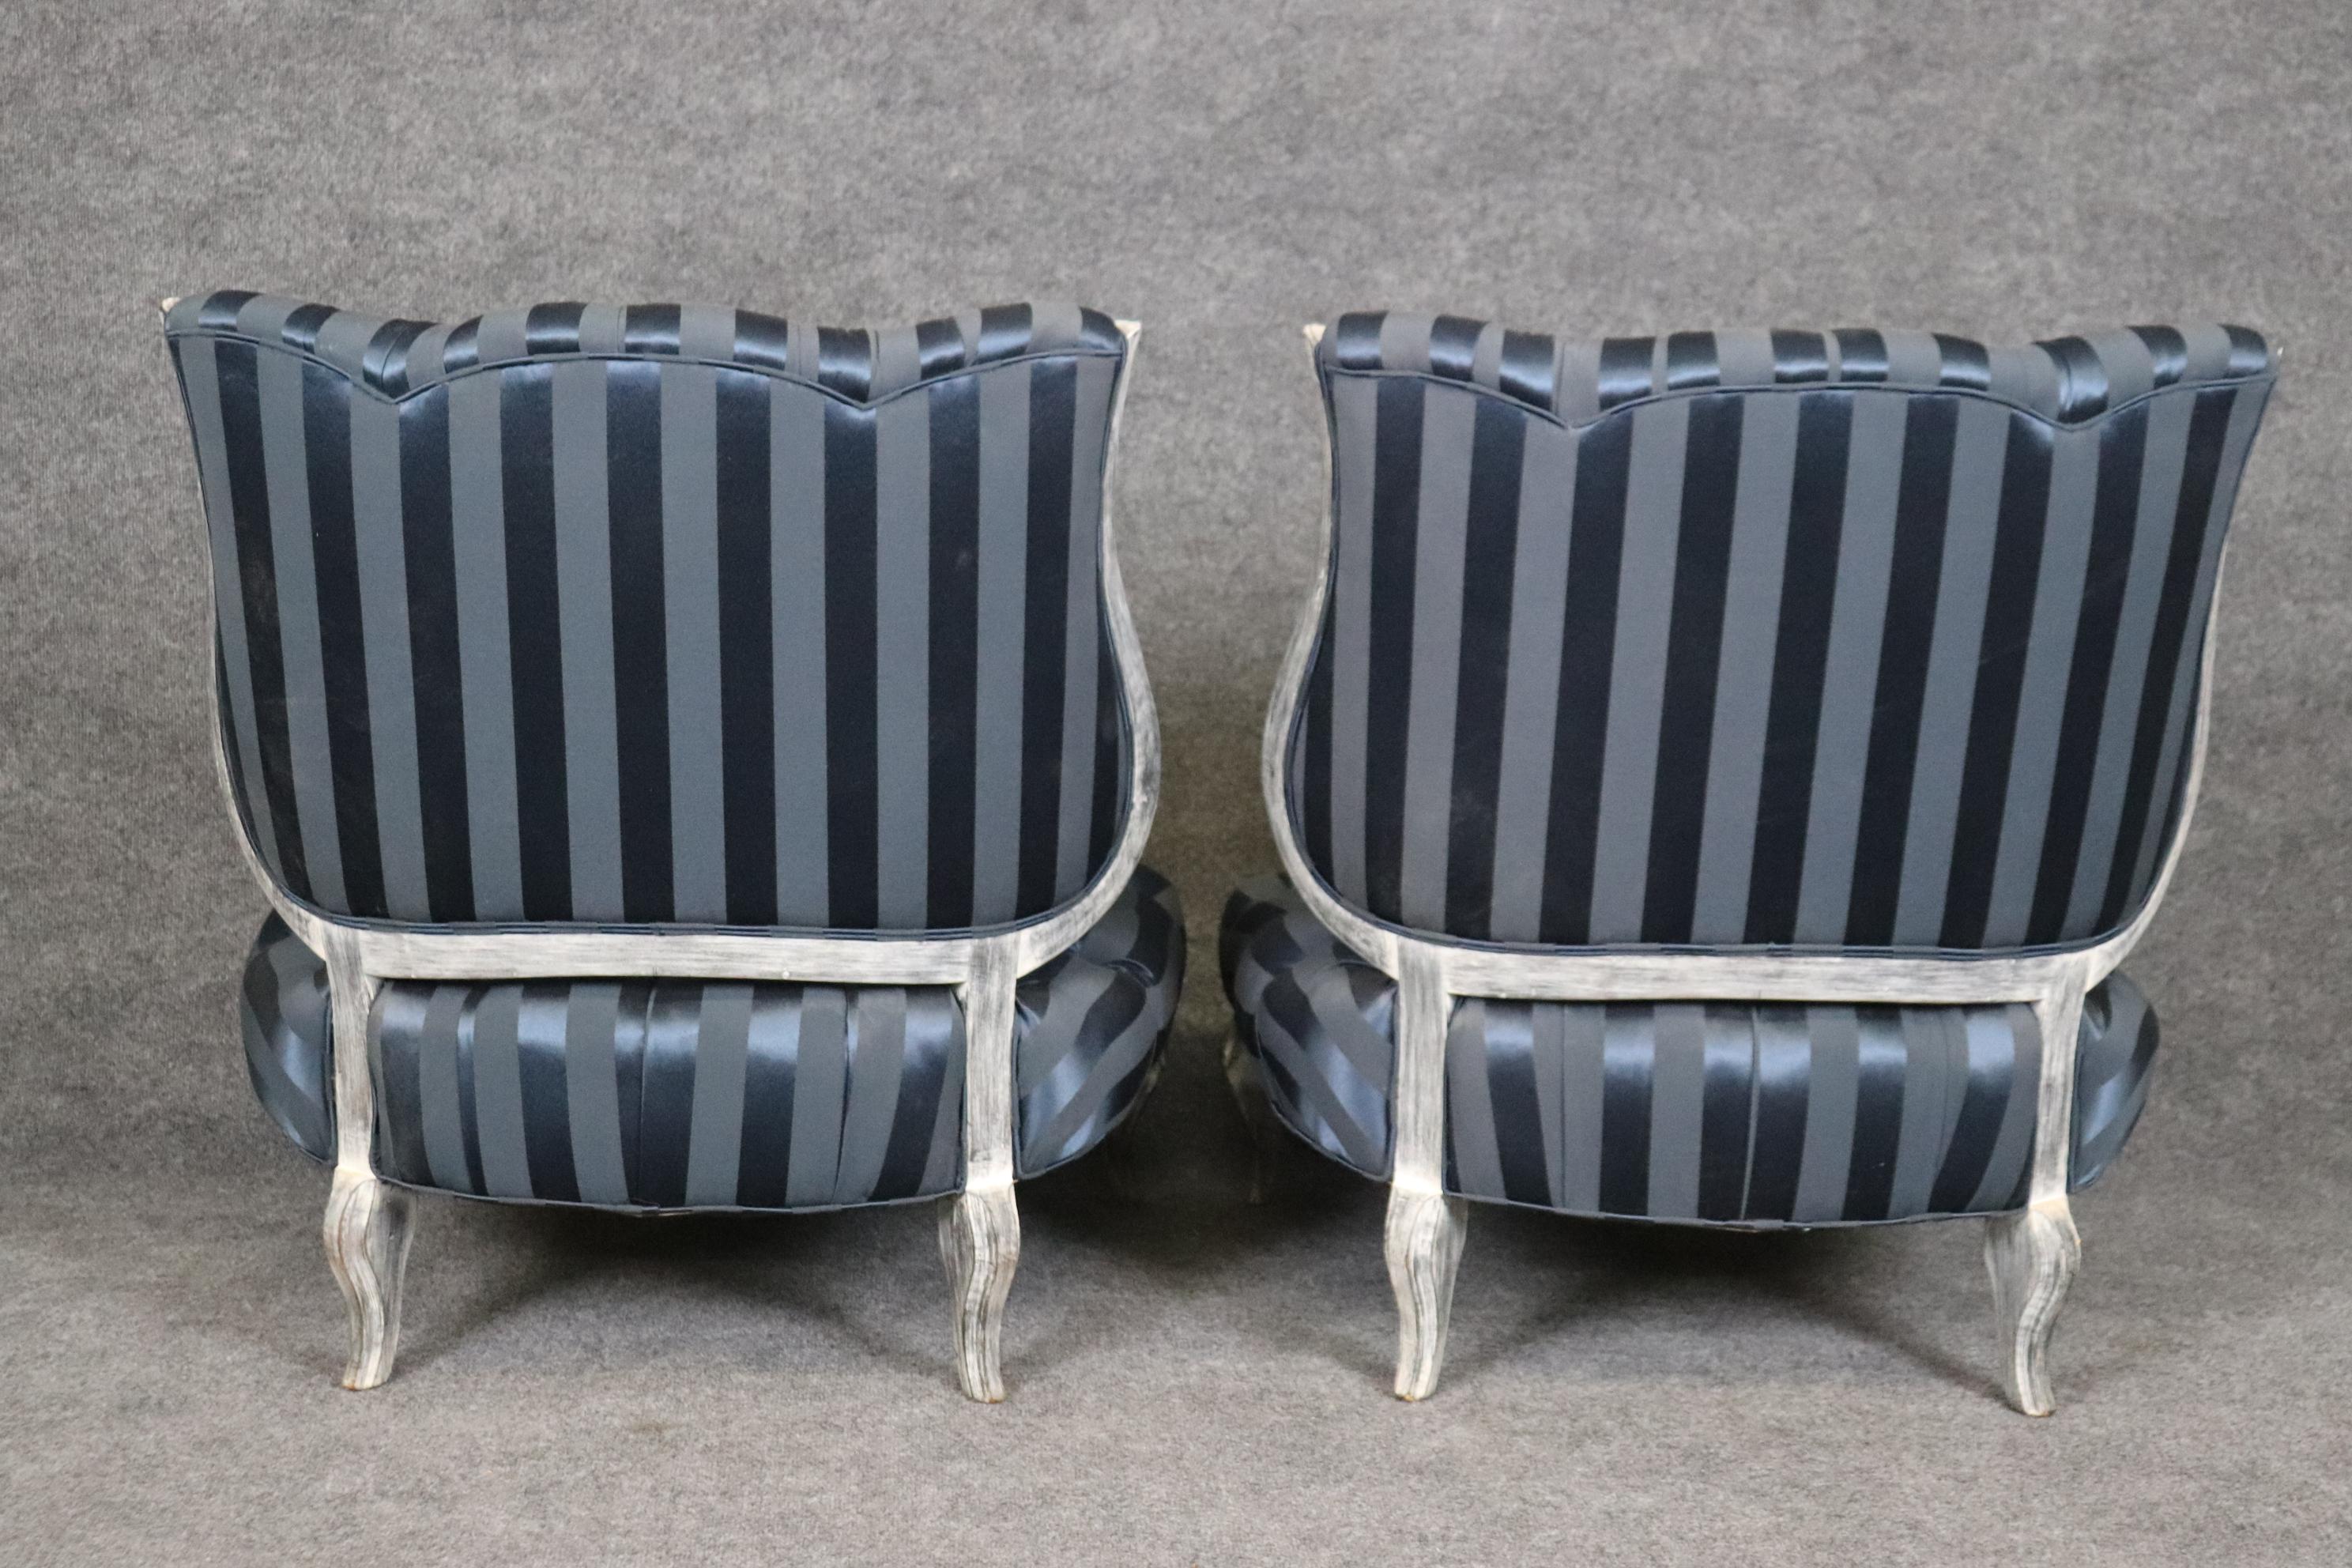 Early 20th Century Very Low Seat Height Antique Tea Gossip Chairs in The French Louis XV Style  For Sale